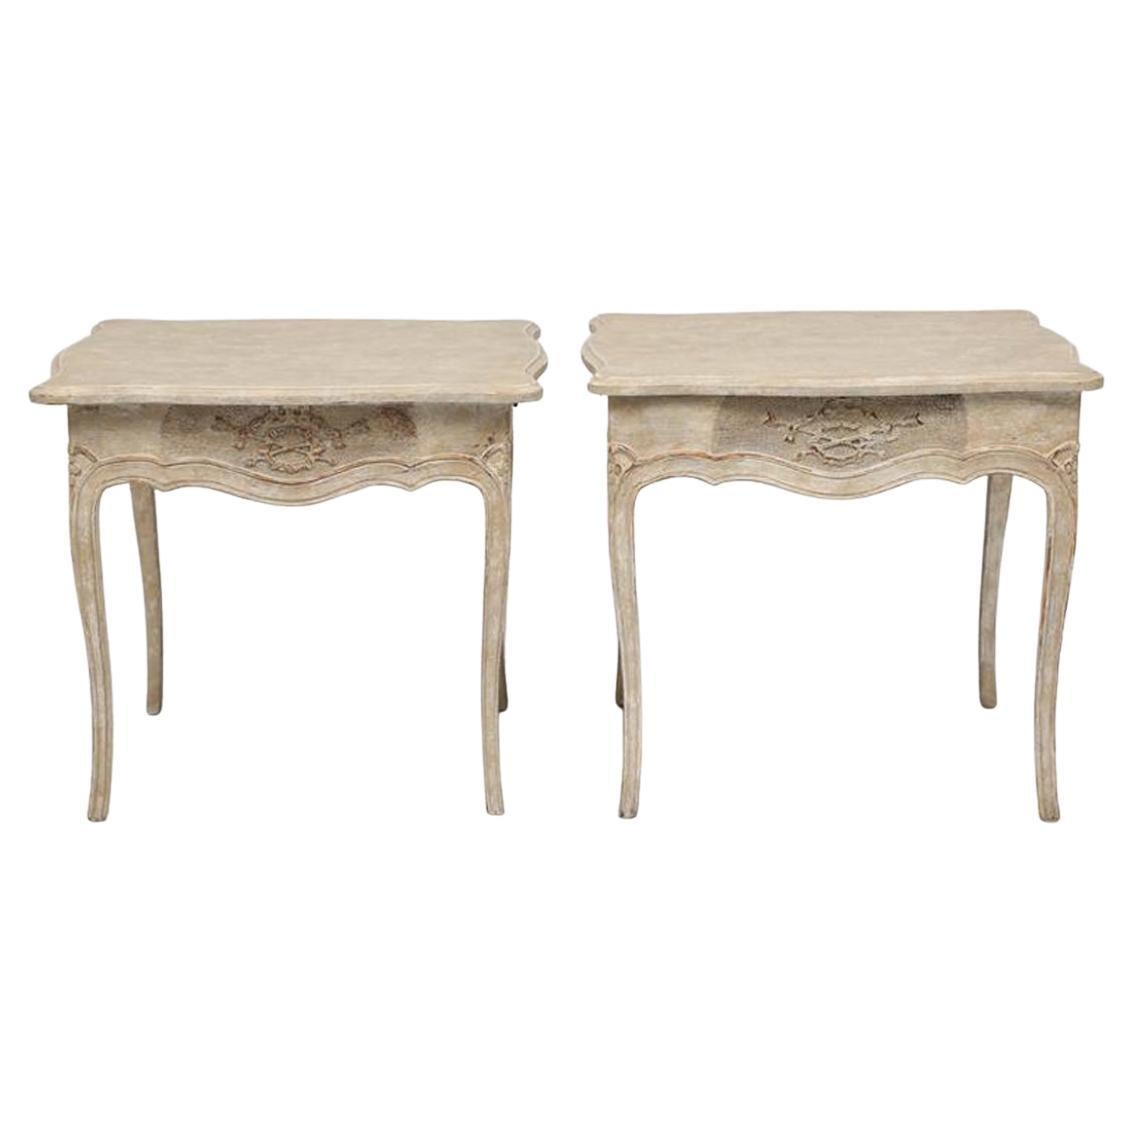 Pair of Italian Painted End Tables, Circa 1940s For Sale